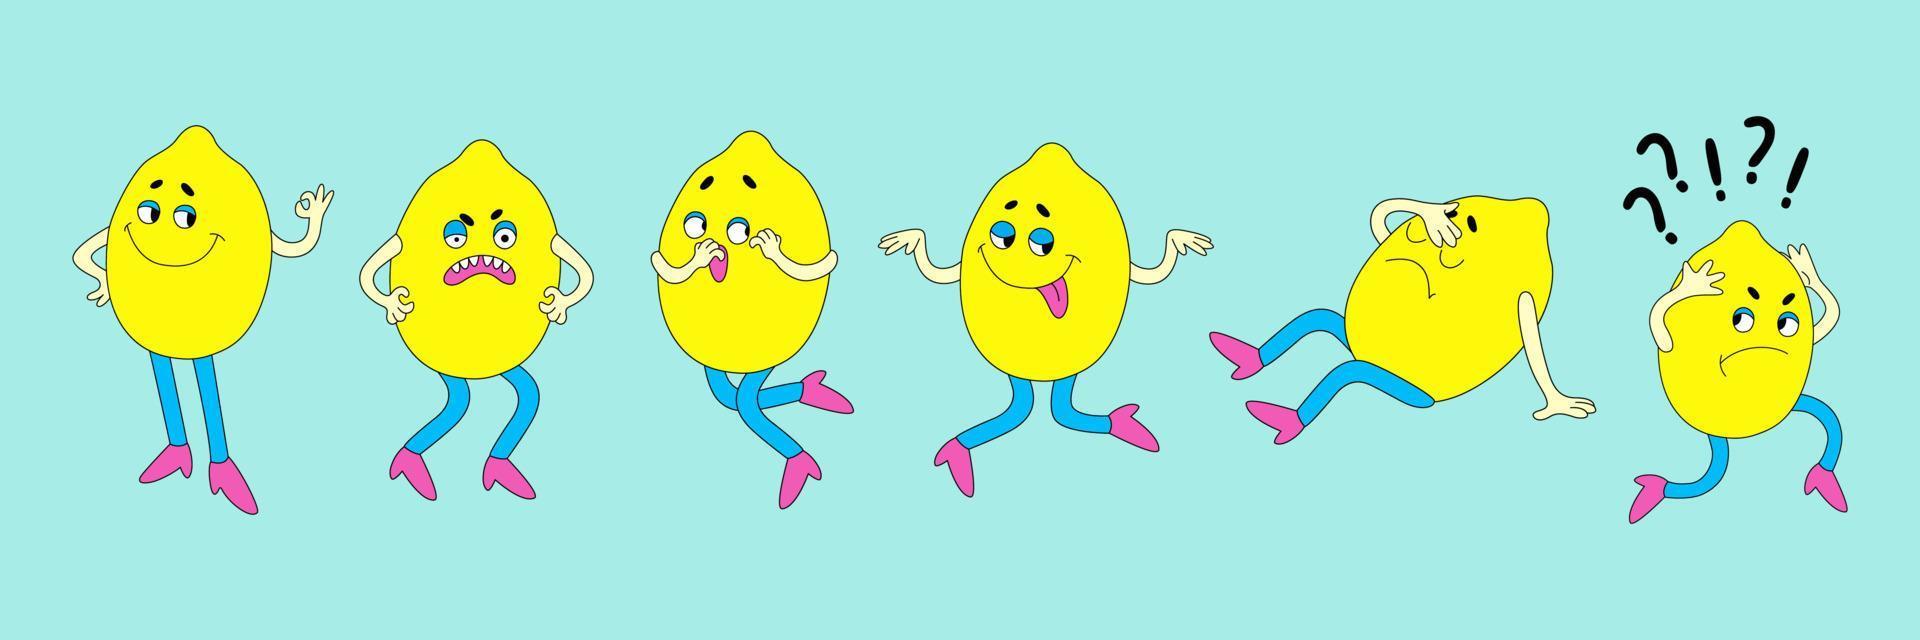 Funny cartoon Lemon characters with different emotions. Cute bright fruit sticker set in retro style. vector